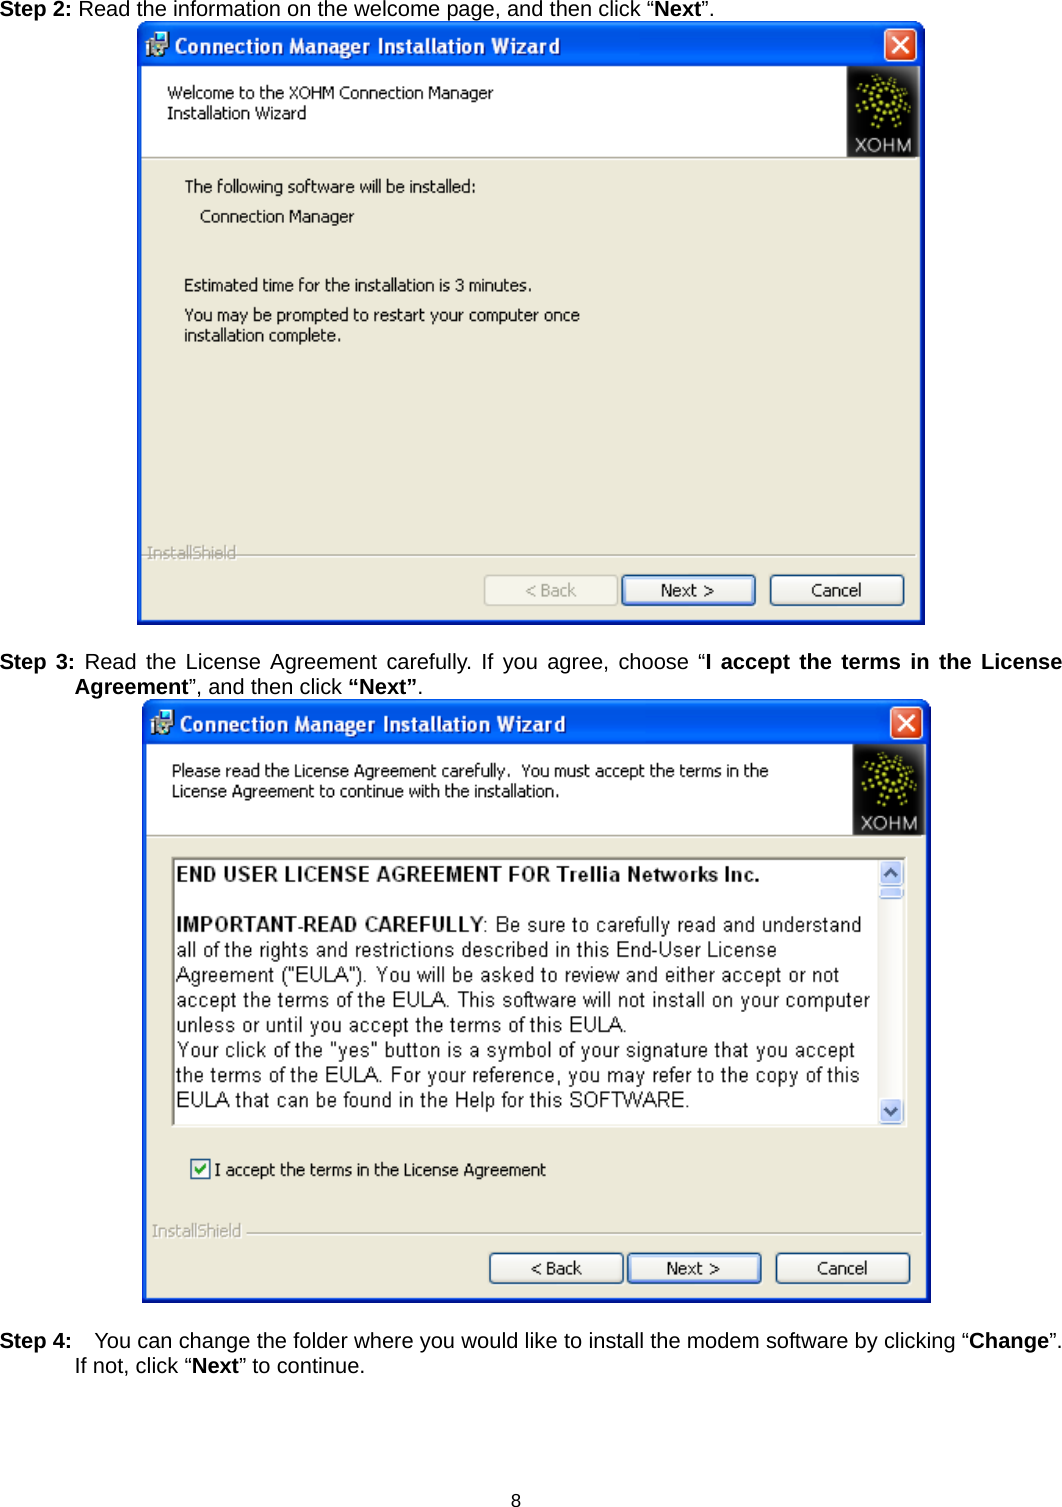  8  Step 2: Read the information on the welcome page, and then click “Next”.   Step 3: Read the License Agreement carefully. If you agree, choose “I accept the terms in the License Agreement”, and then click “Next”.    Step 4:    You can change the folder where you would like to install the modem software by clicking “Change”. If not, click “Next” to continue. 